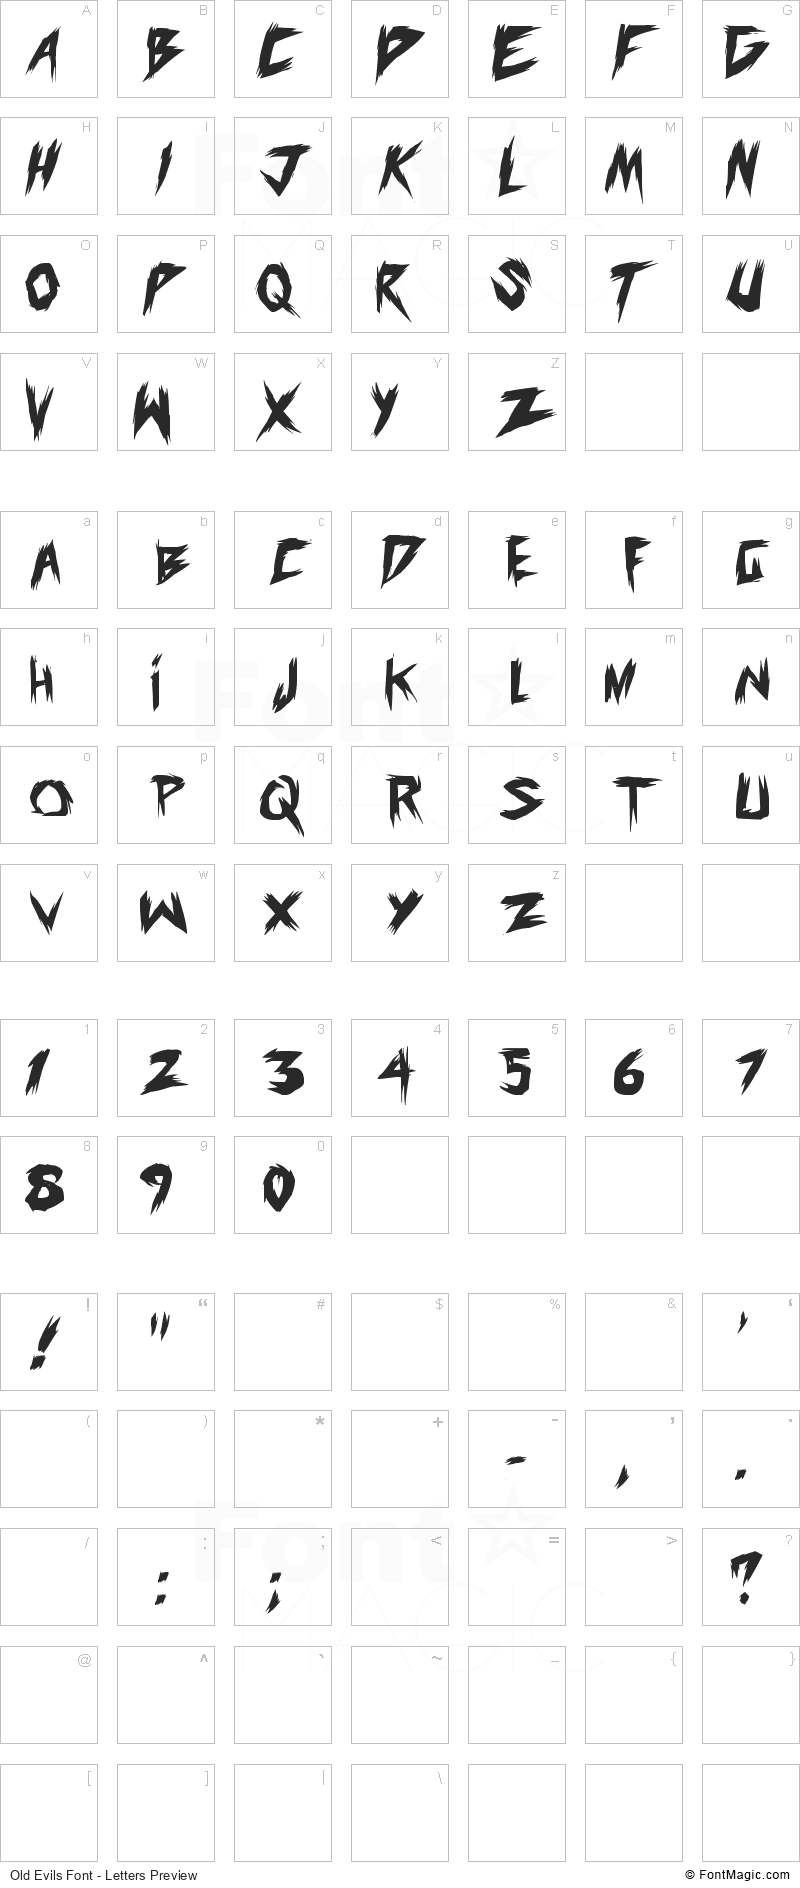 Old Evils Font - All Latters Preview Chart